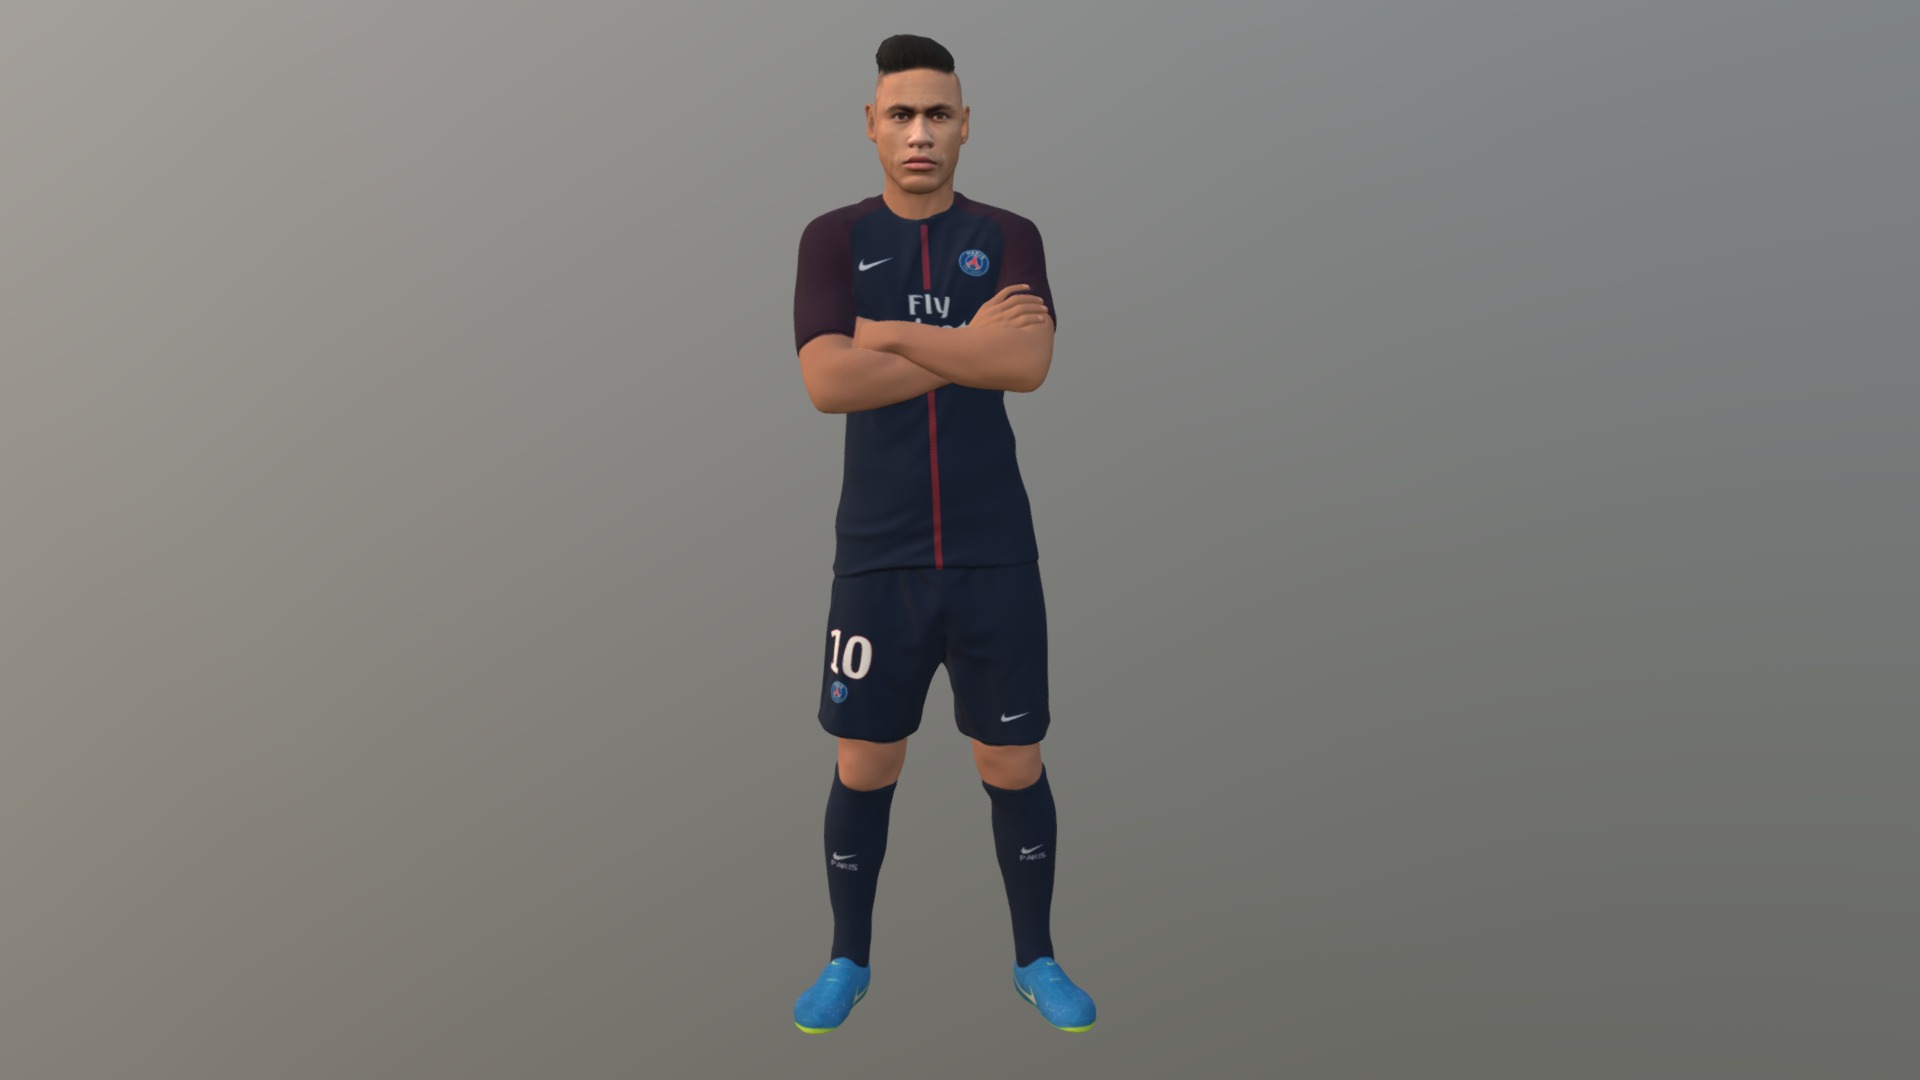 3D model Neymar for full color 3D printing - This is a 3D model of the Neymar for full color 3D printing. The 3D model is about a man in a sports uniform.